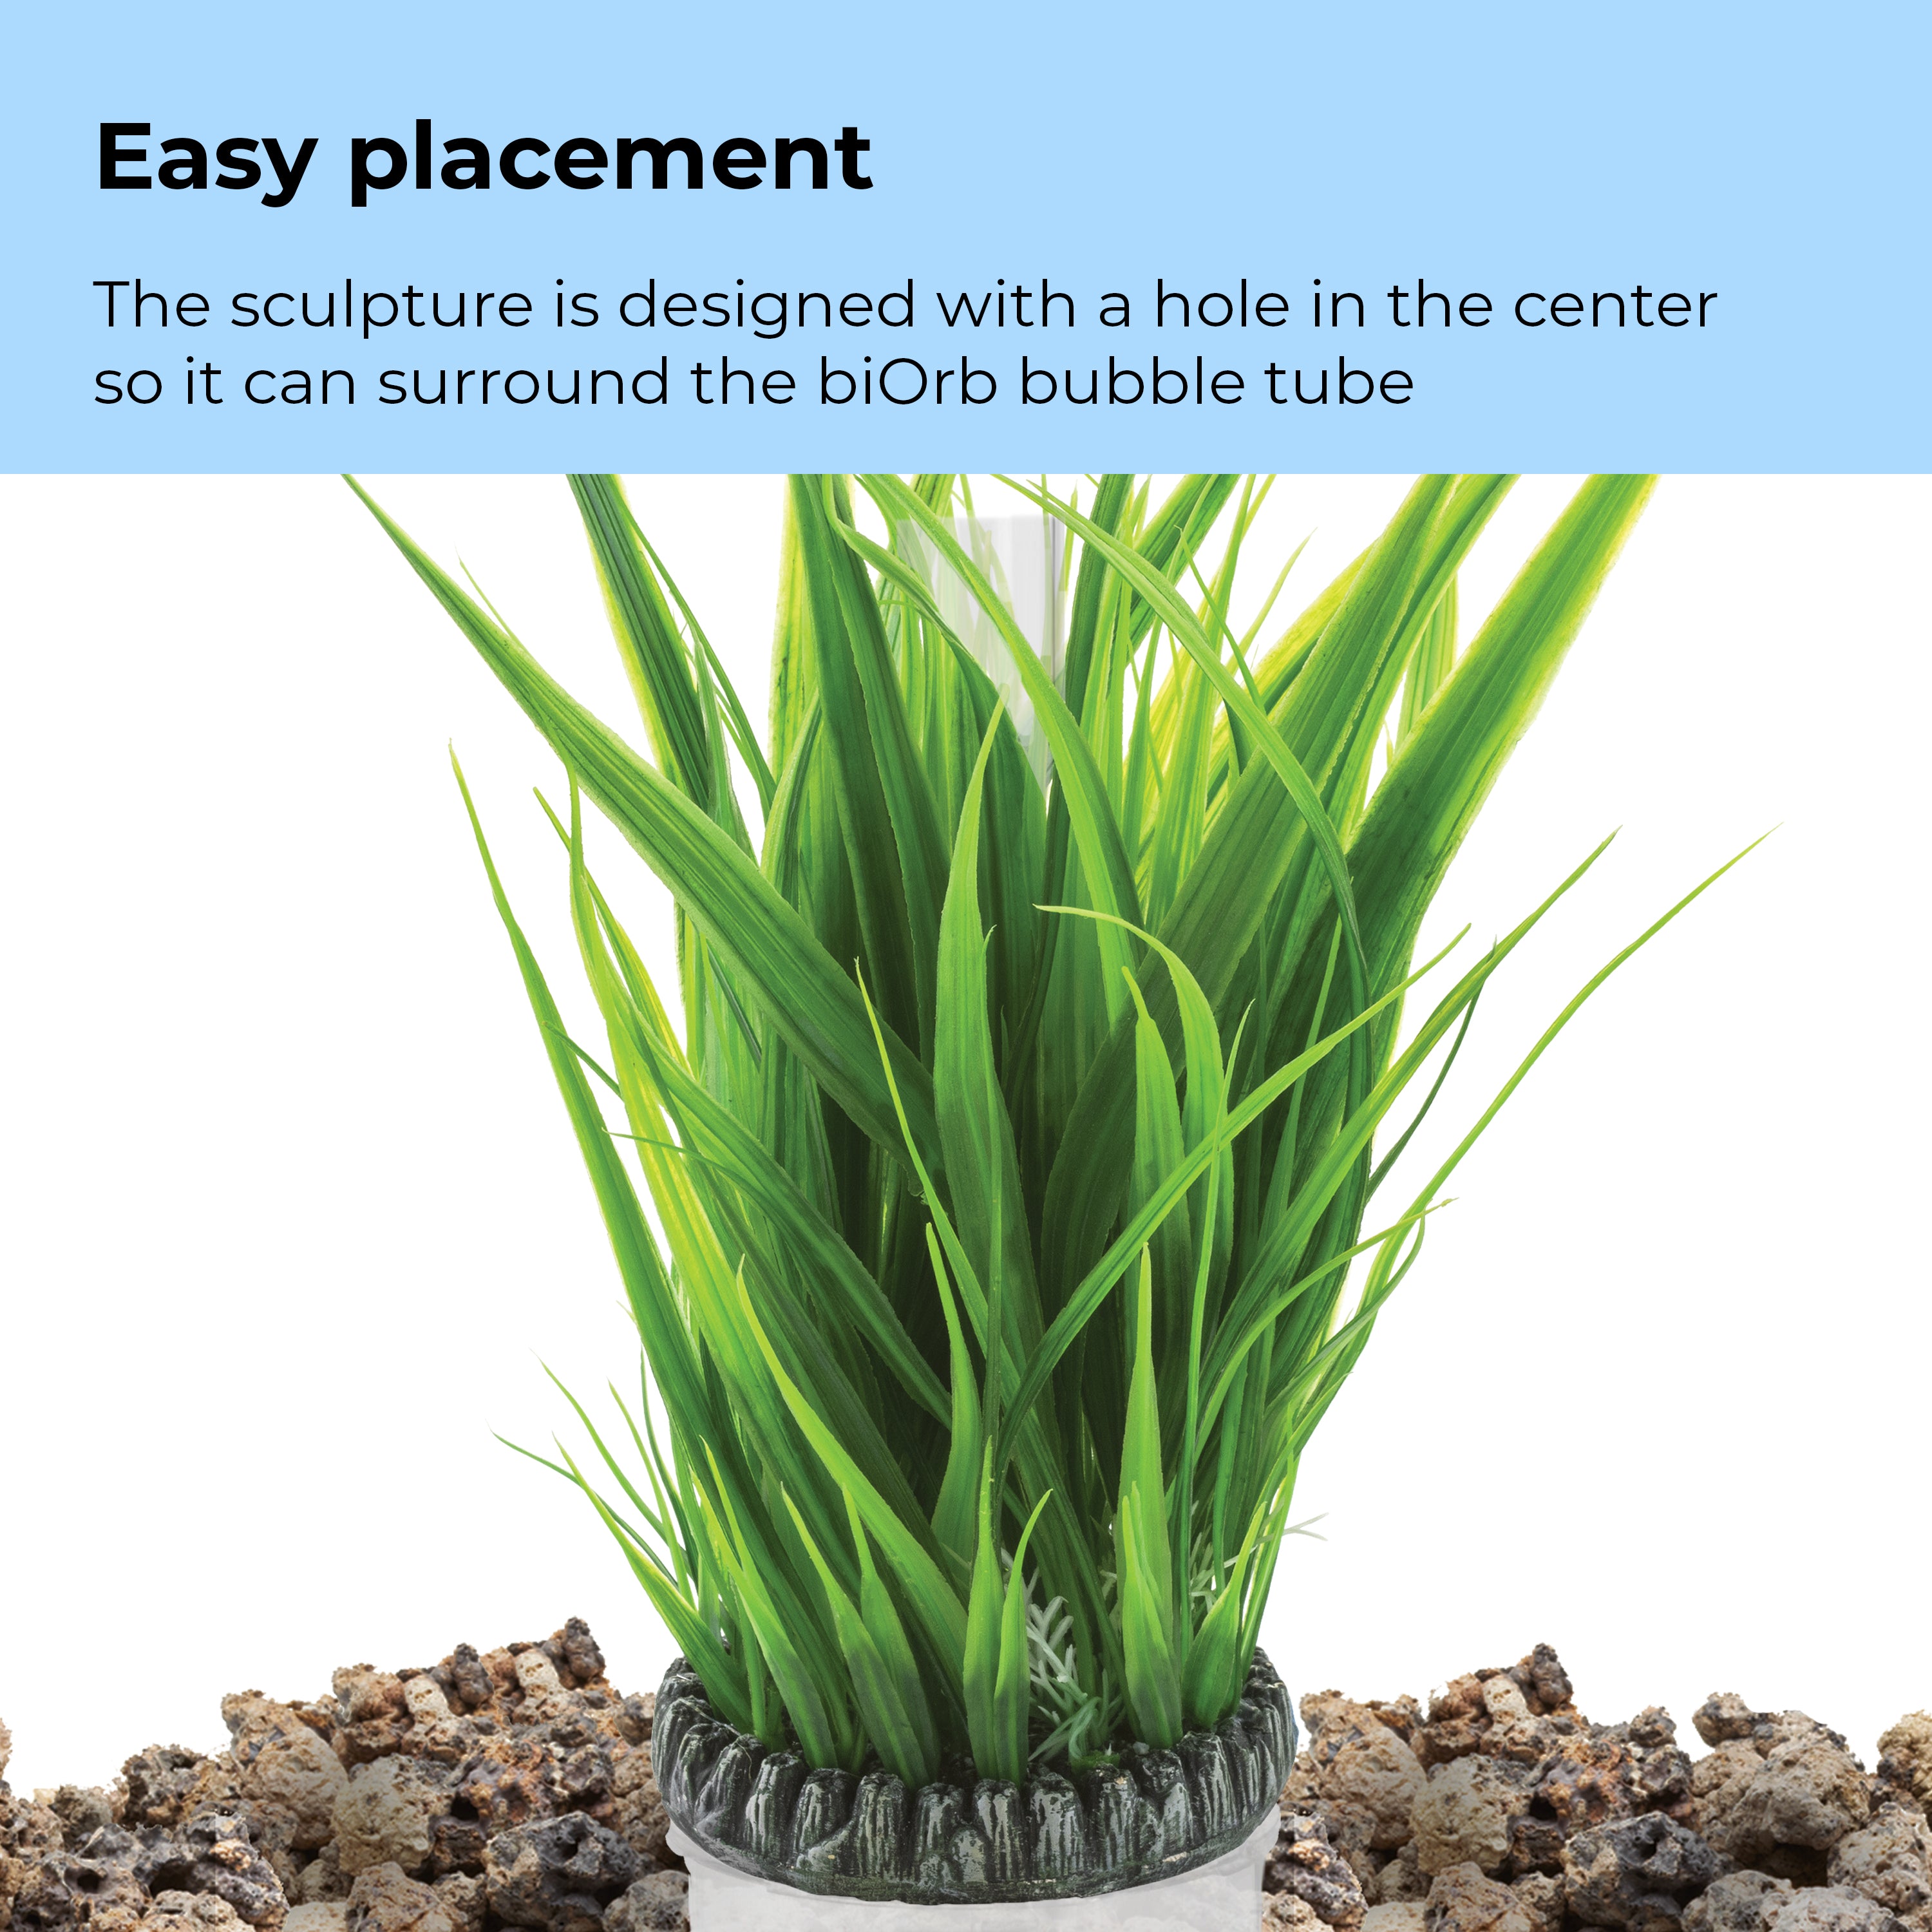 Large Grass Ring surrounds the biOrb bubble tube